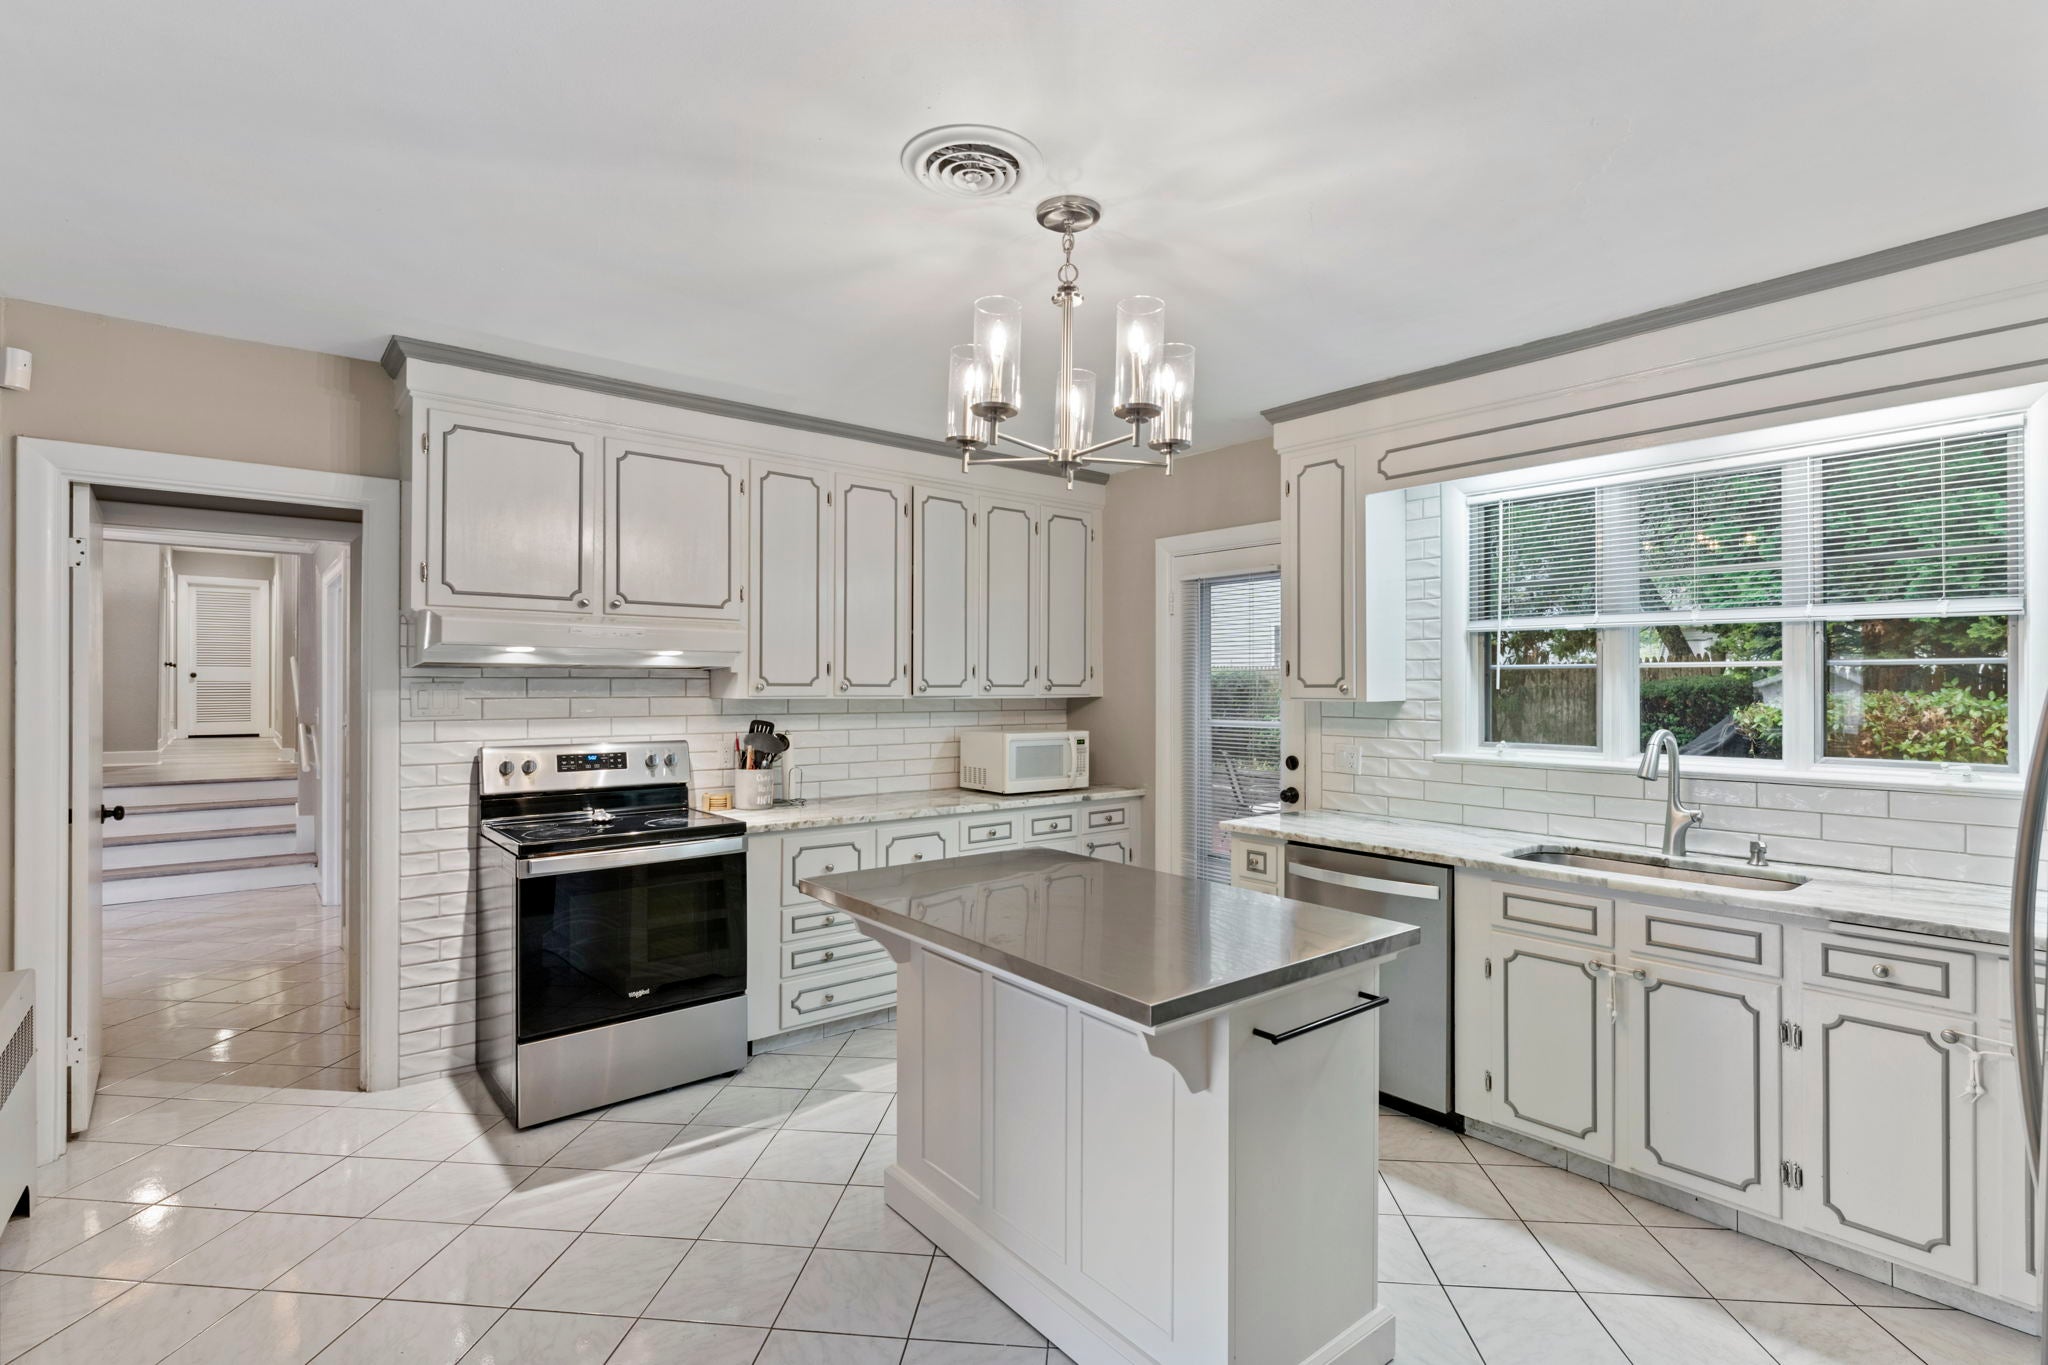 Beige walls, white kitchen with honed-frame cabinetry and tile flooring.